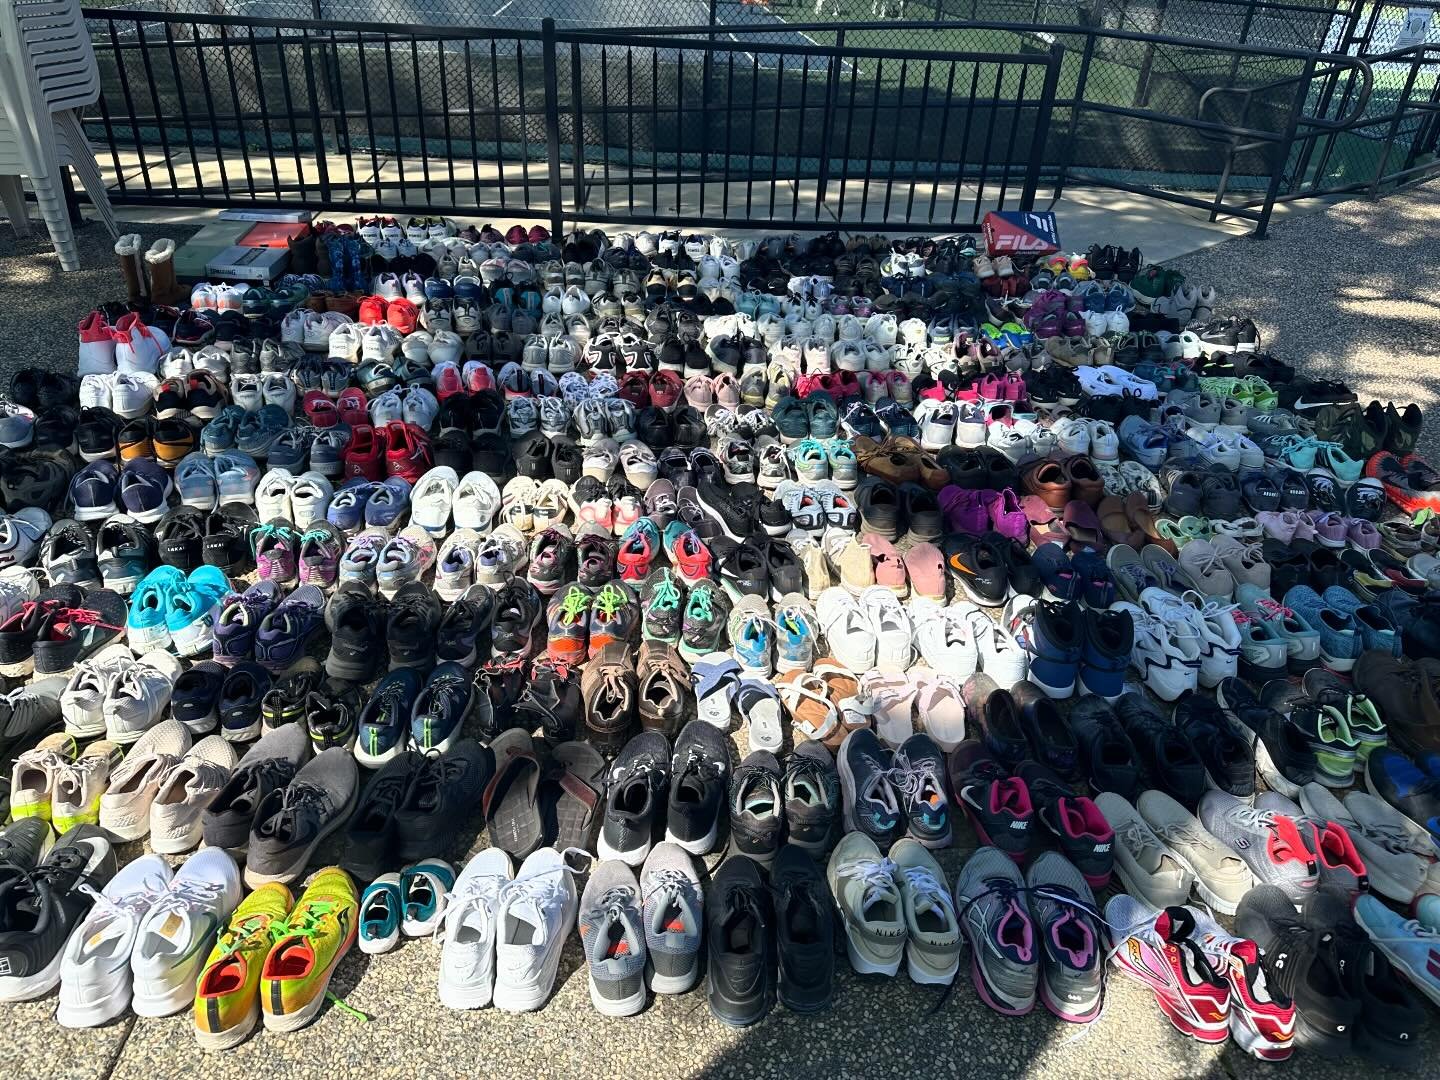 The generosity of our members never ceases to amaze us! You all helped us collect 300 pairs of shoes that will be shipped to help cover the feet of people in Honduras. That beats our number collected last year! Thank you for helping us accomplish thi